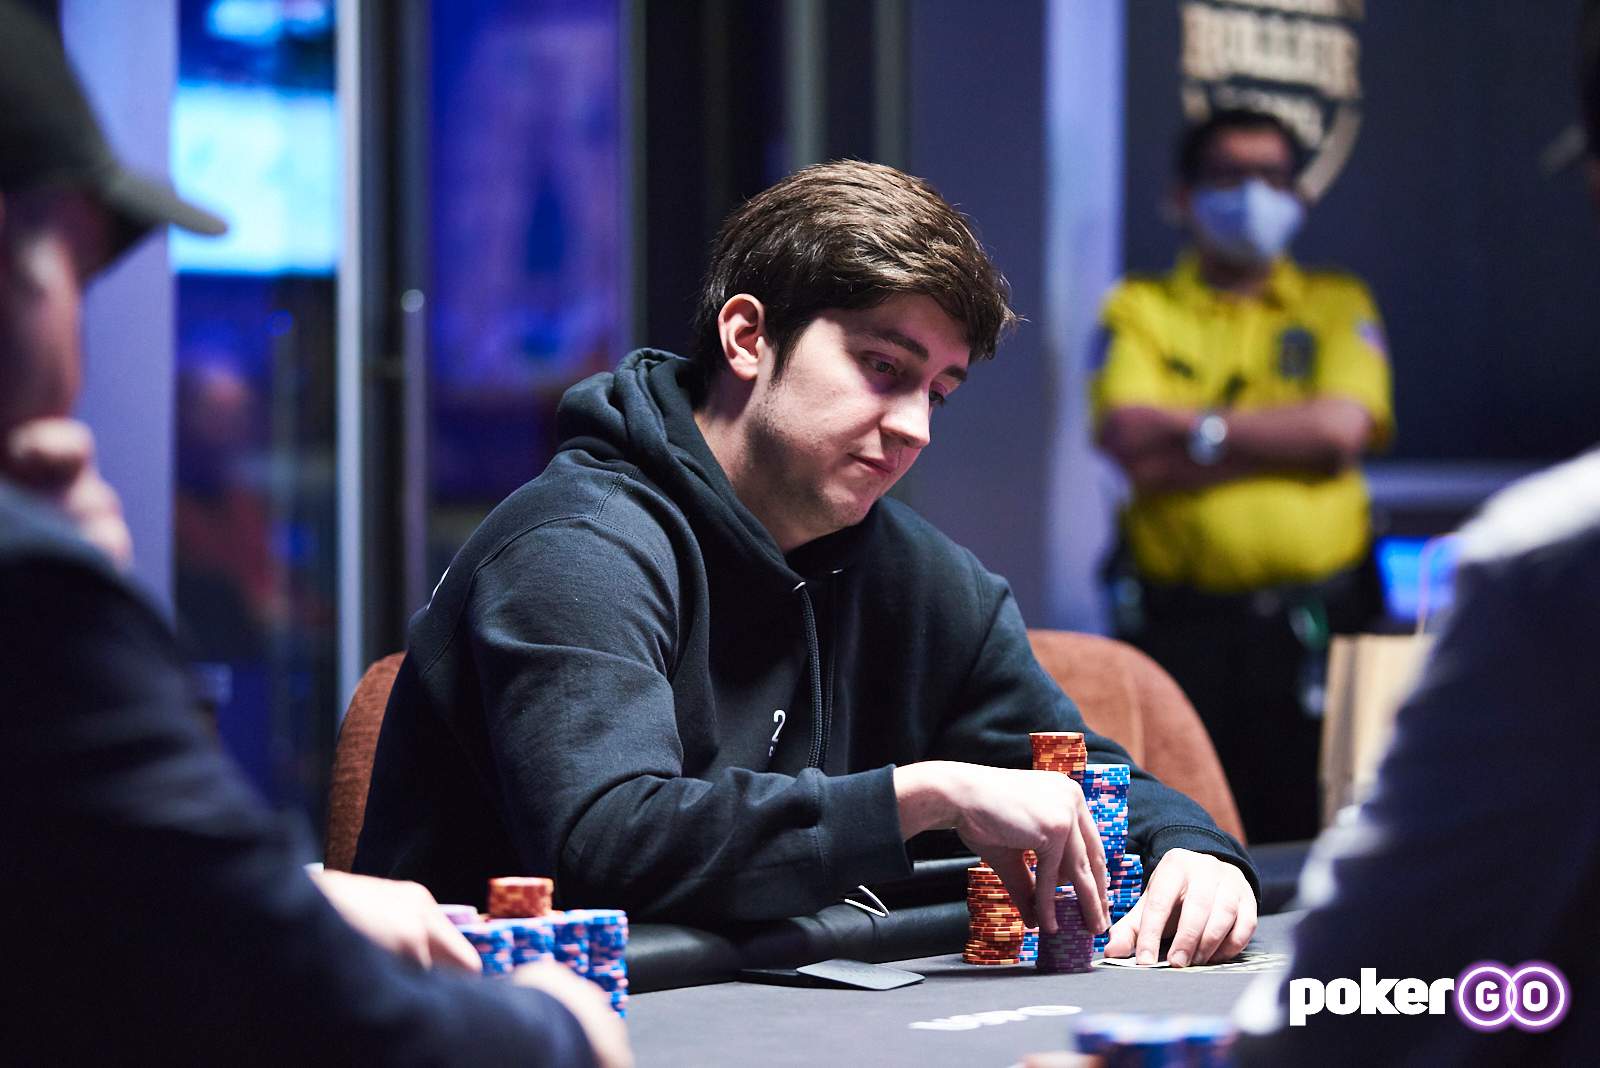 Ali Imsirovic Leads the Final Table of Event #2: $10,000 No-Limit Hold’em